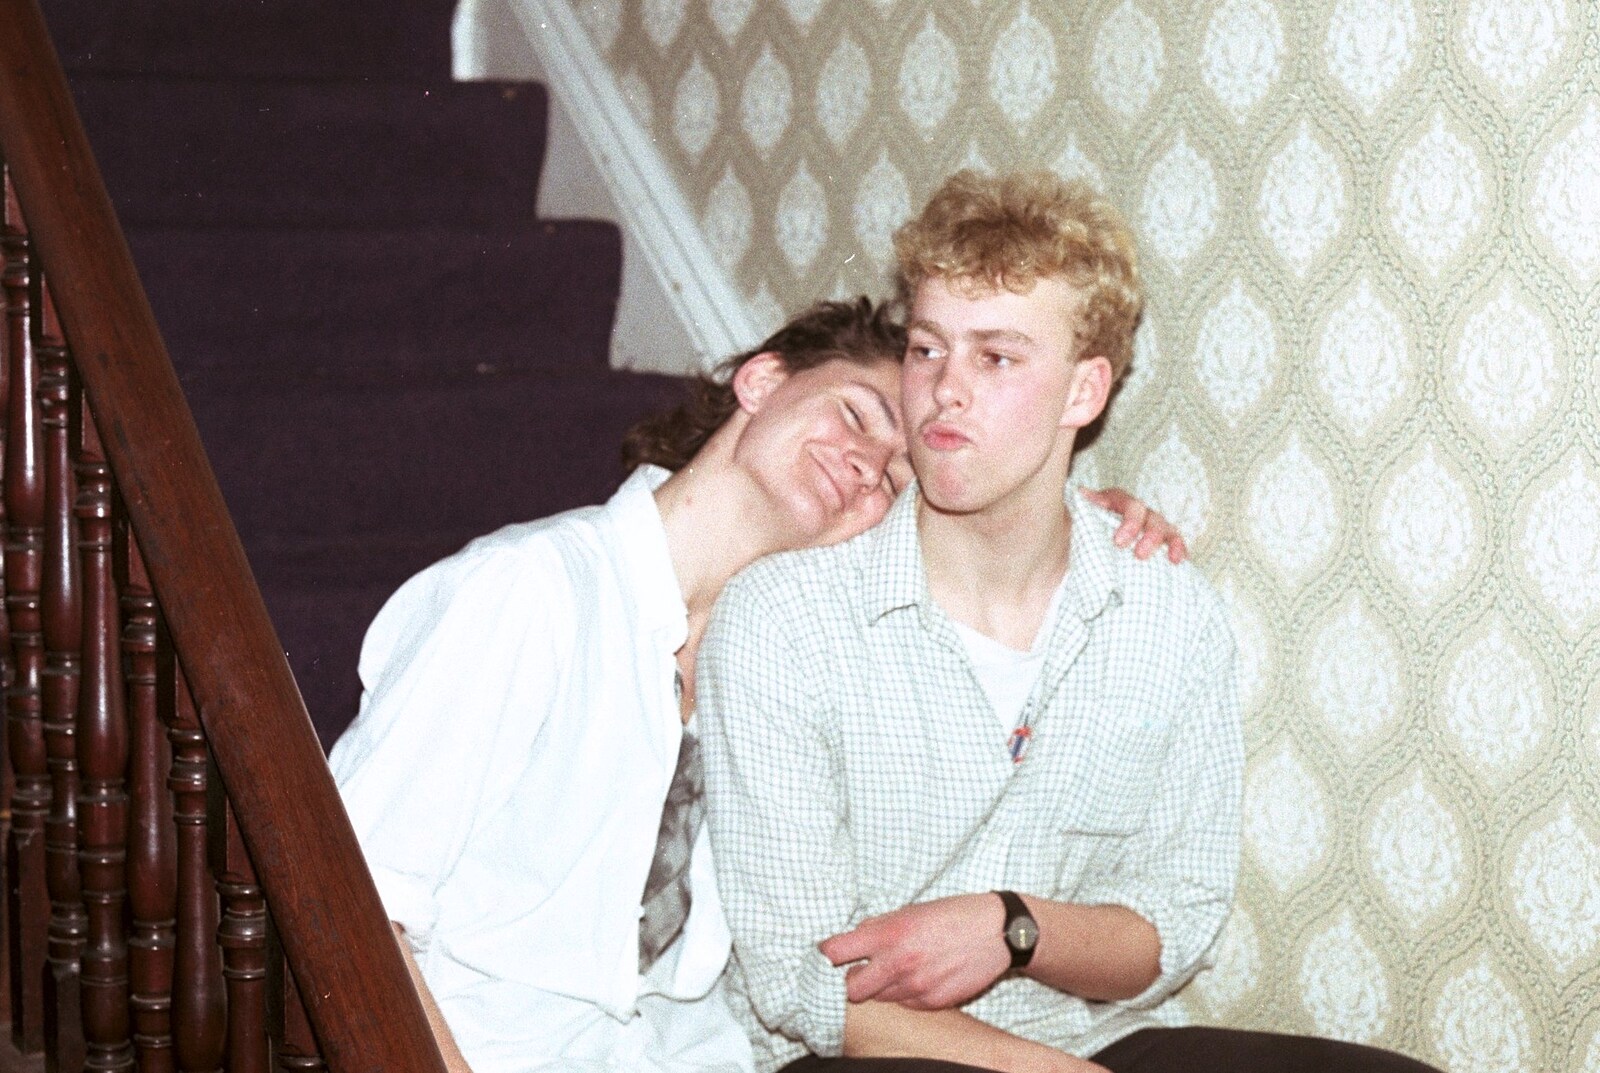 Halfway up the stairs from Uni: Simon Read's Party, North Road East, Plymouth - 10th October 1986